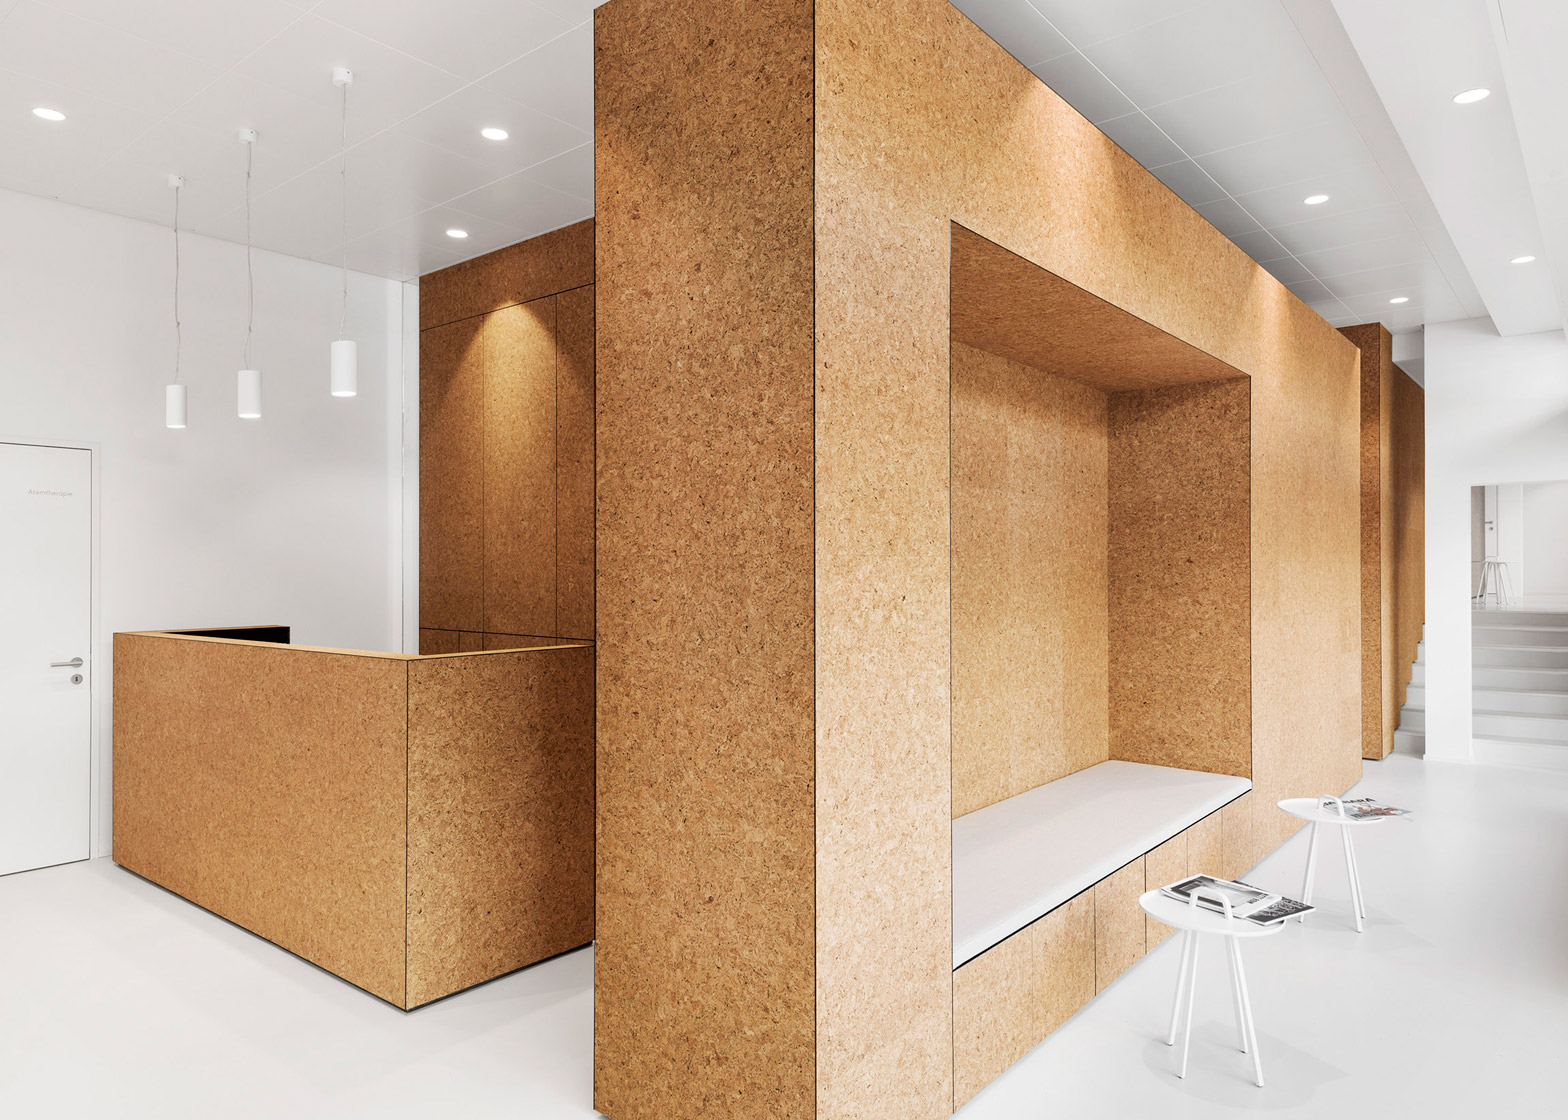 Dost Converts 1960s Restaurant Into Heart Clinic With Cork Cubicles